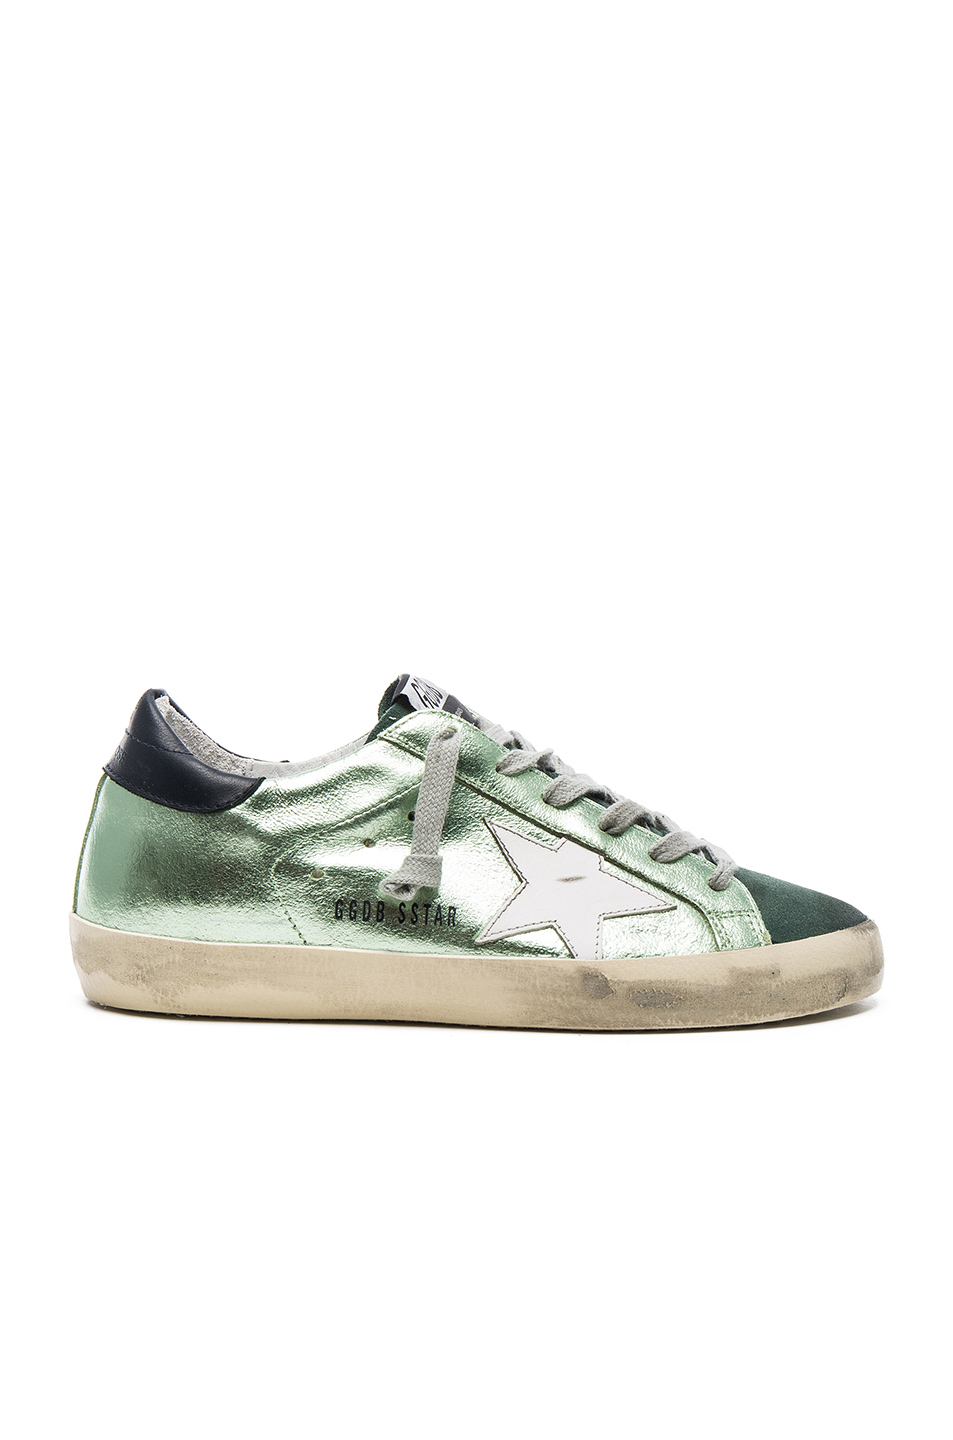 GOLDEN GOOSE SUPER STAR LEATHER SNEAKERS, GREEN LAME | ModeSens